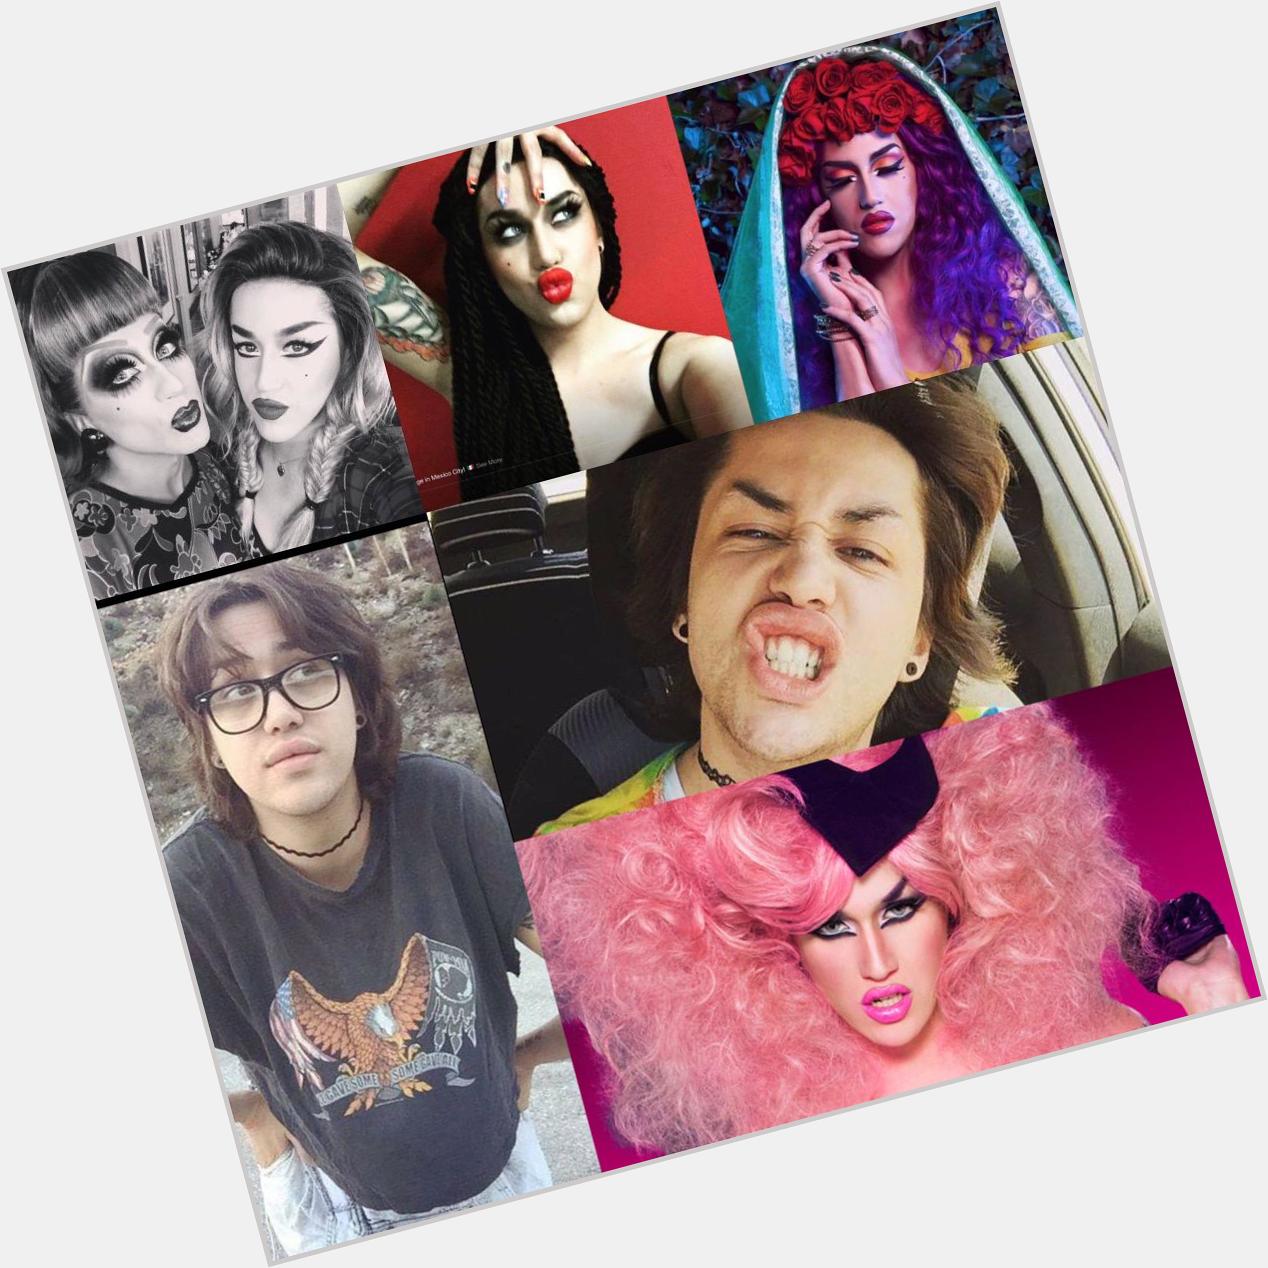    HAPPY BIRTHDAY ADORE DELANO!!!    I love you so much, have the most amazing time tonight xxxx       